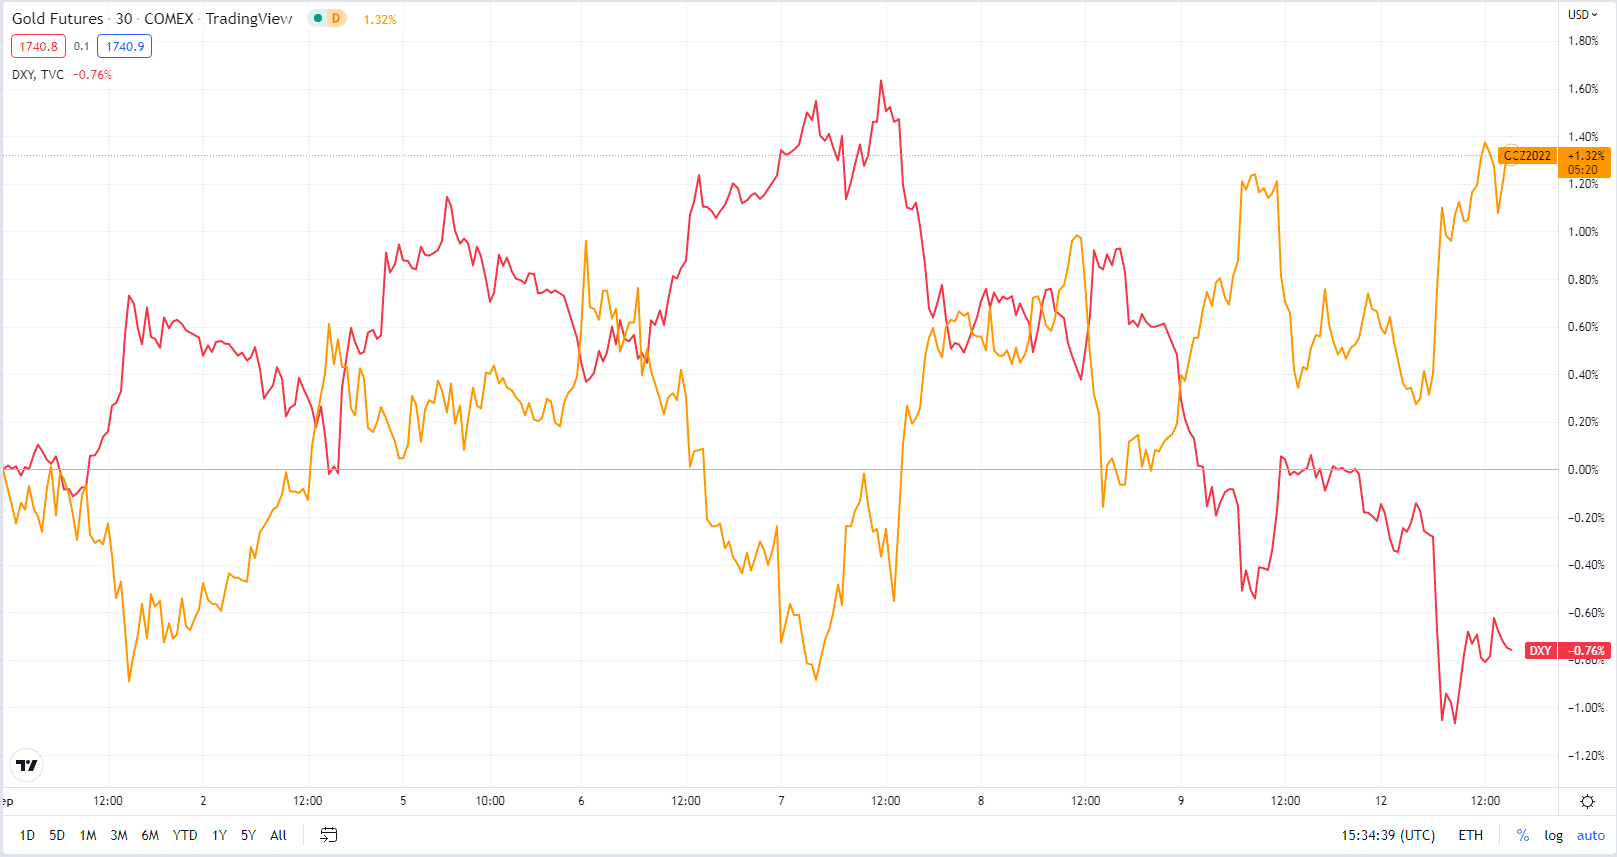 The comparison in development between GC (Gold Futures) and DXY (The US Dollar Index). Source: tradingview.com